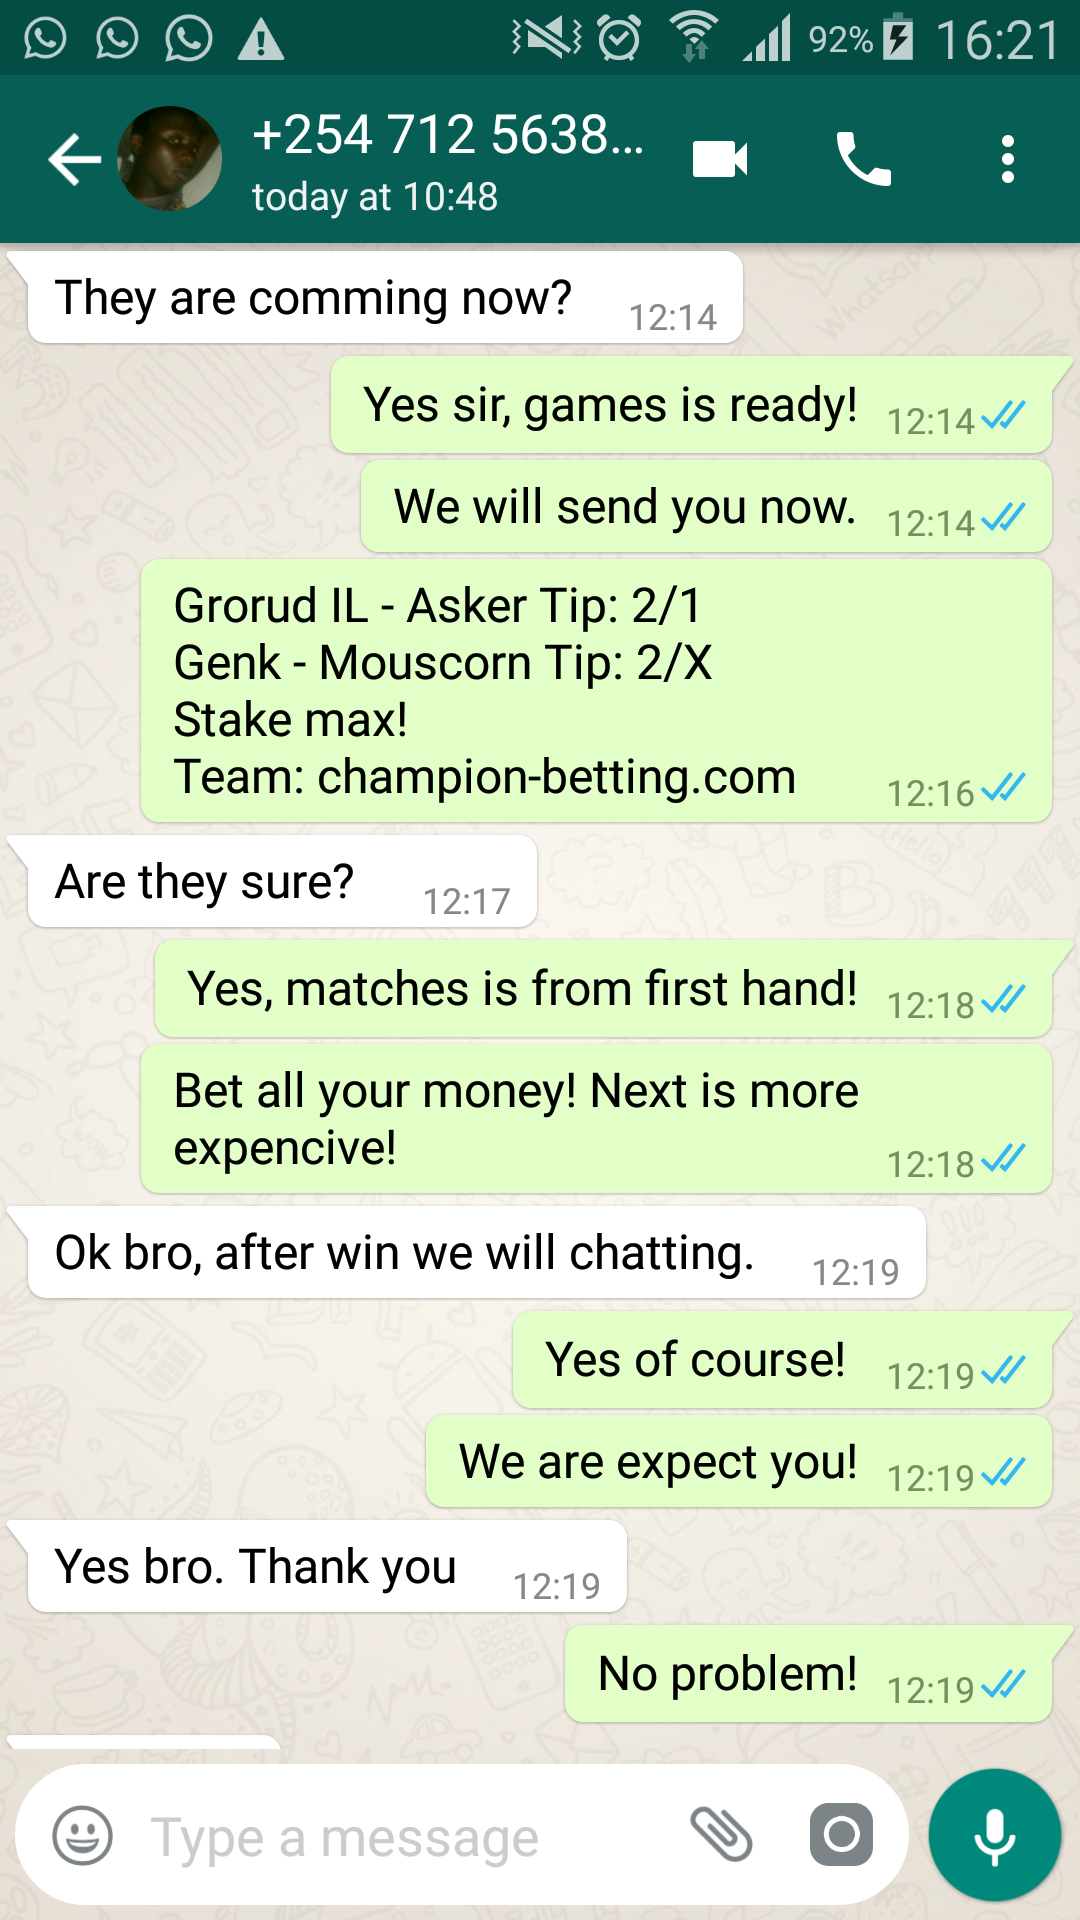 master soccer picks, rigged matches, manipulated matches, 1×2 fixed predict, 1×2 soccer tips, free daily single matches, 100 soccer predictions, 2-1 fixed match, 1-2 fixed tips, free match fixed